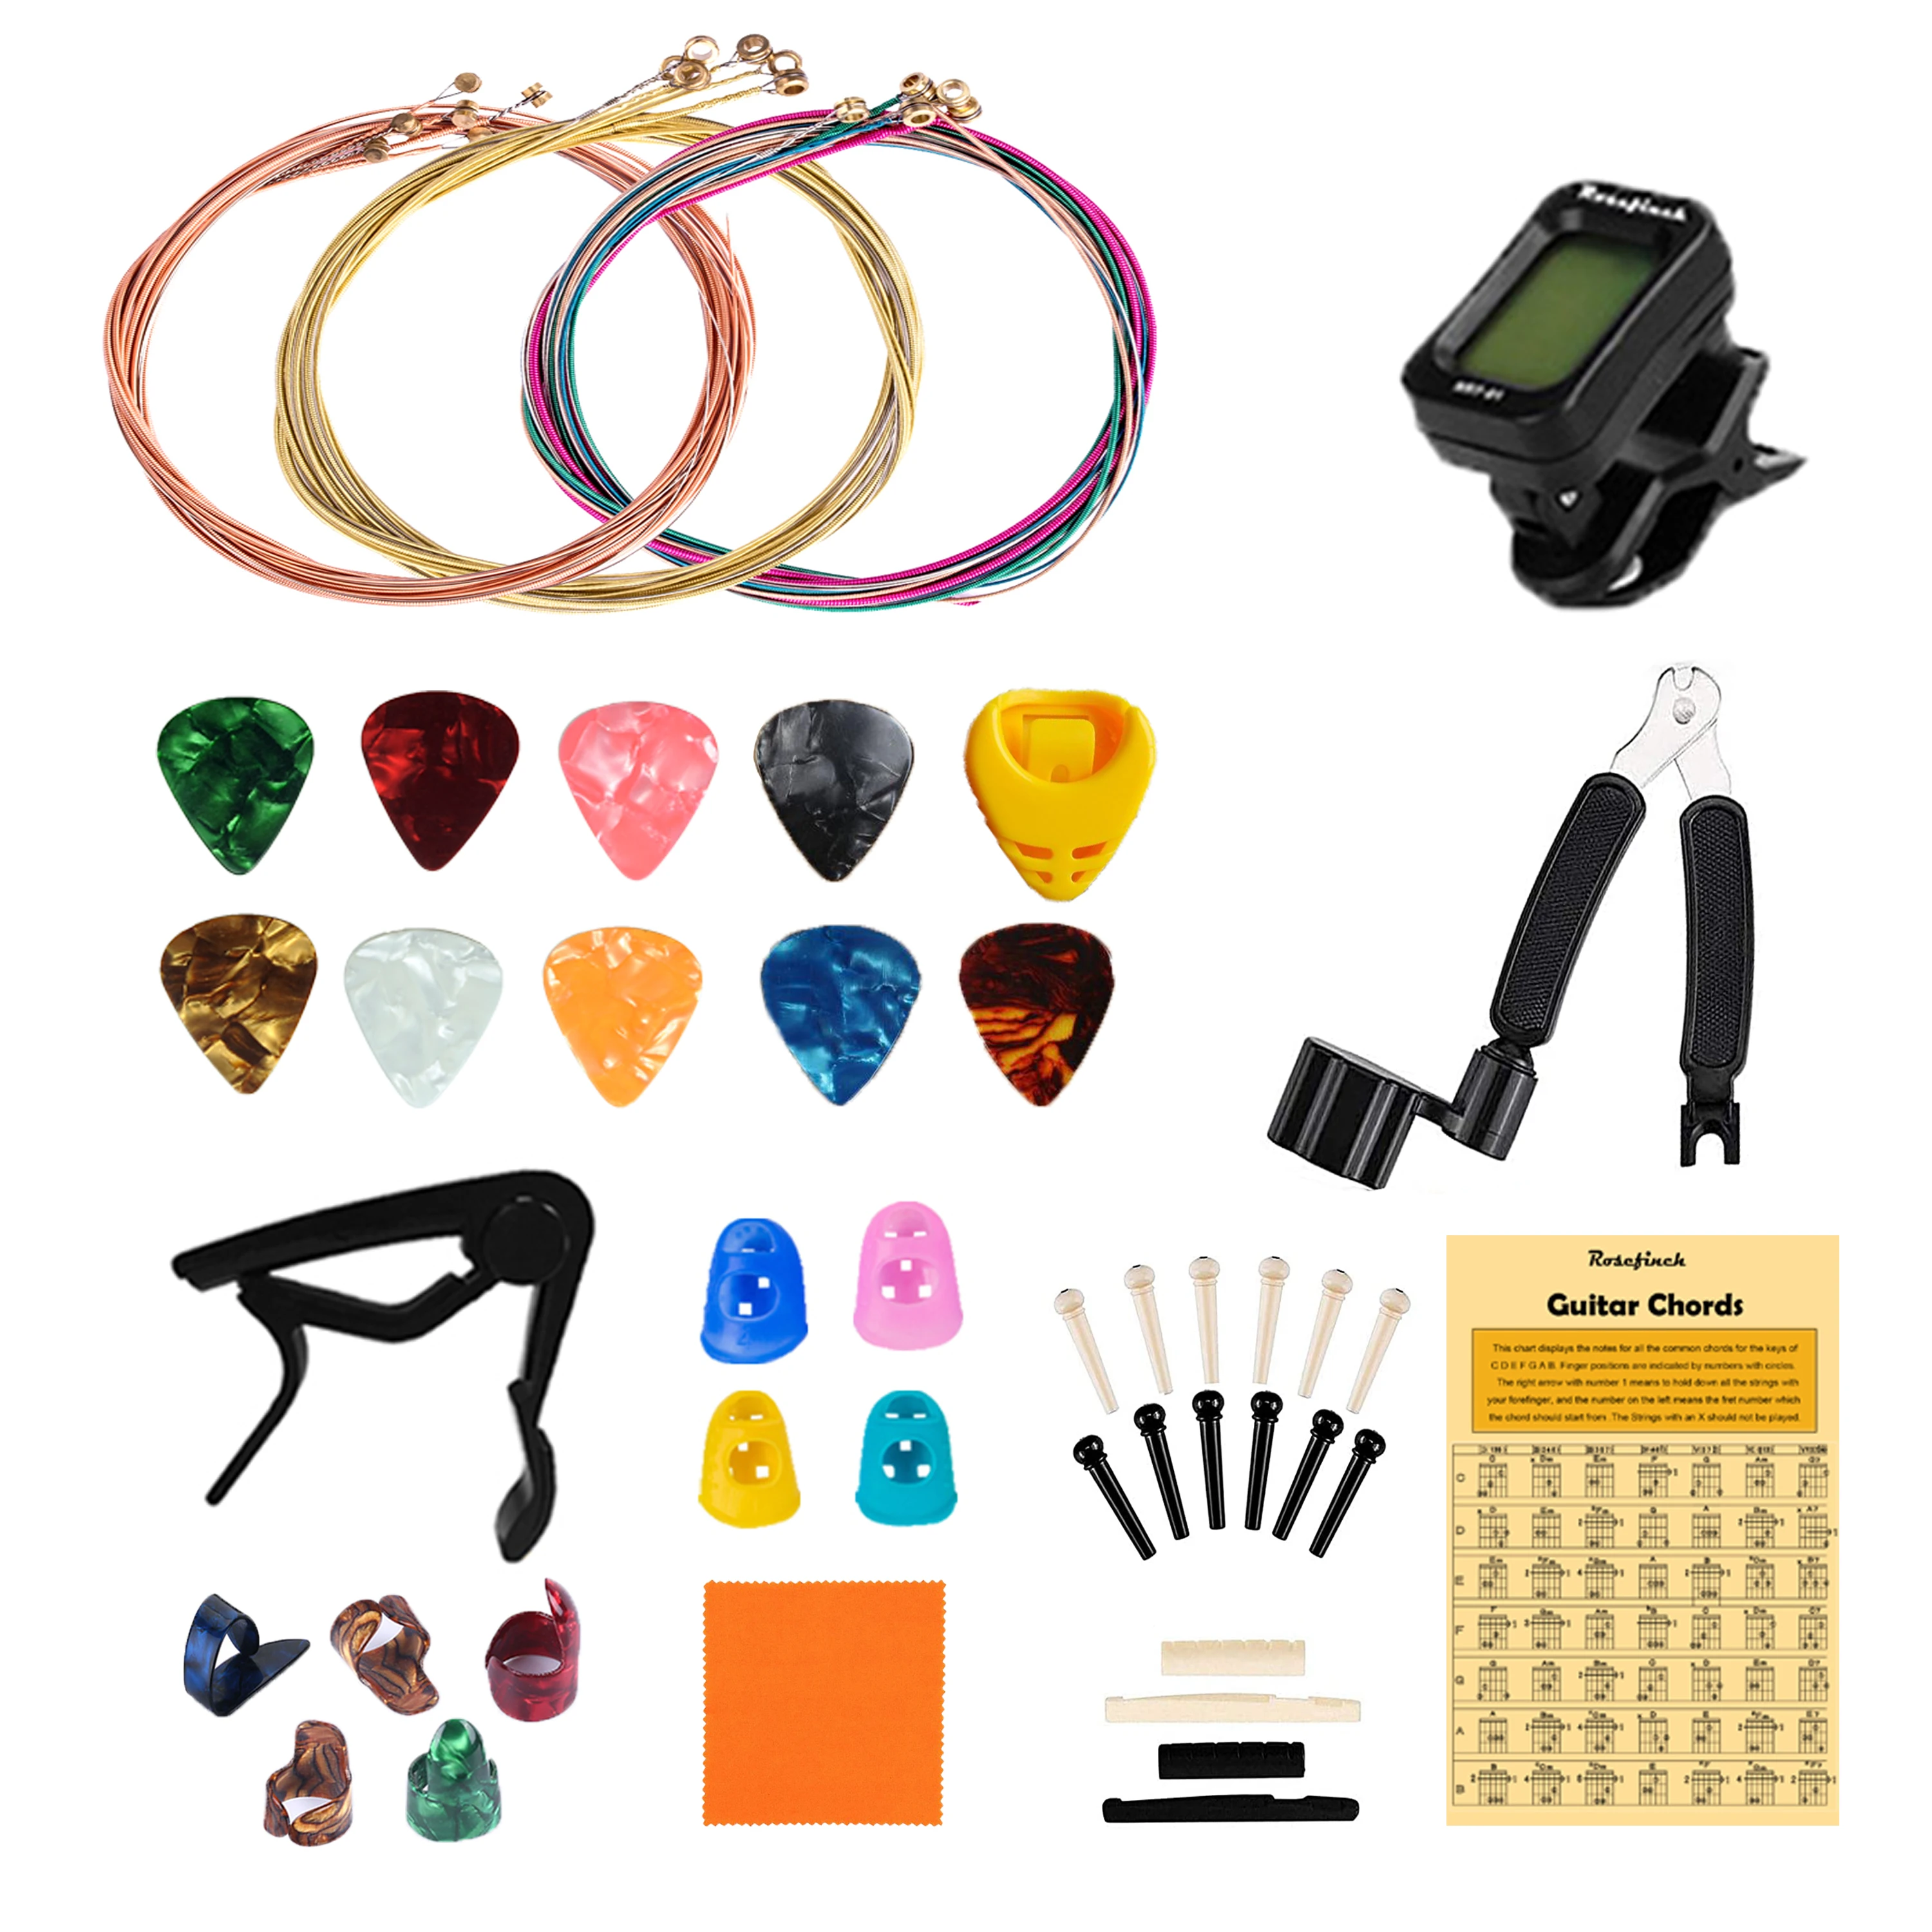 

Rosefinch Guitar Accessories Kit 58 PCS with Strings Tuner Capo String Winder Cutter Bridge Pins Nuts Saddles Chord Chart